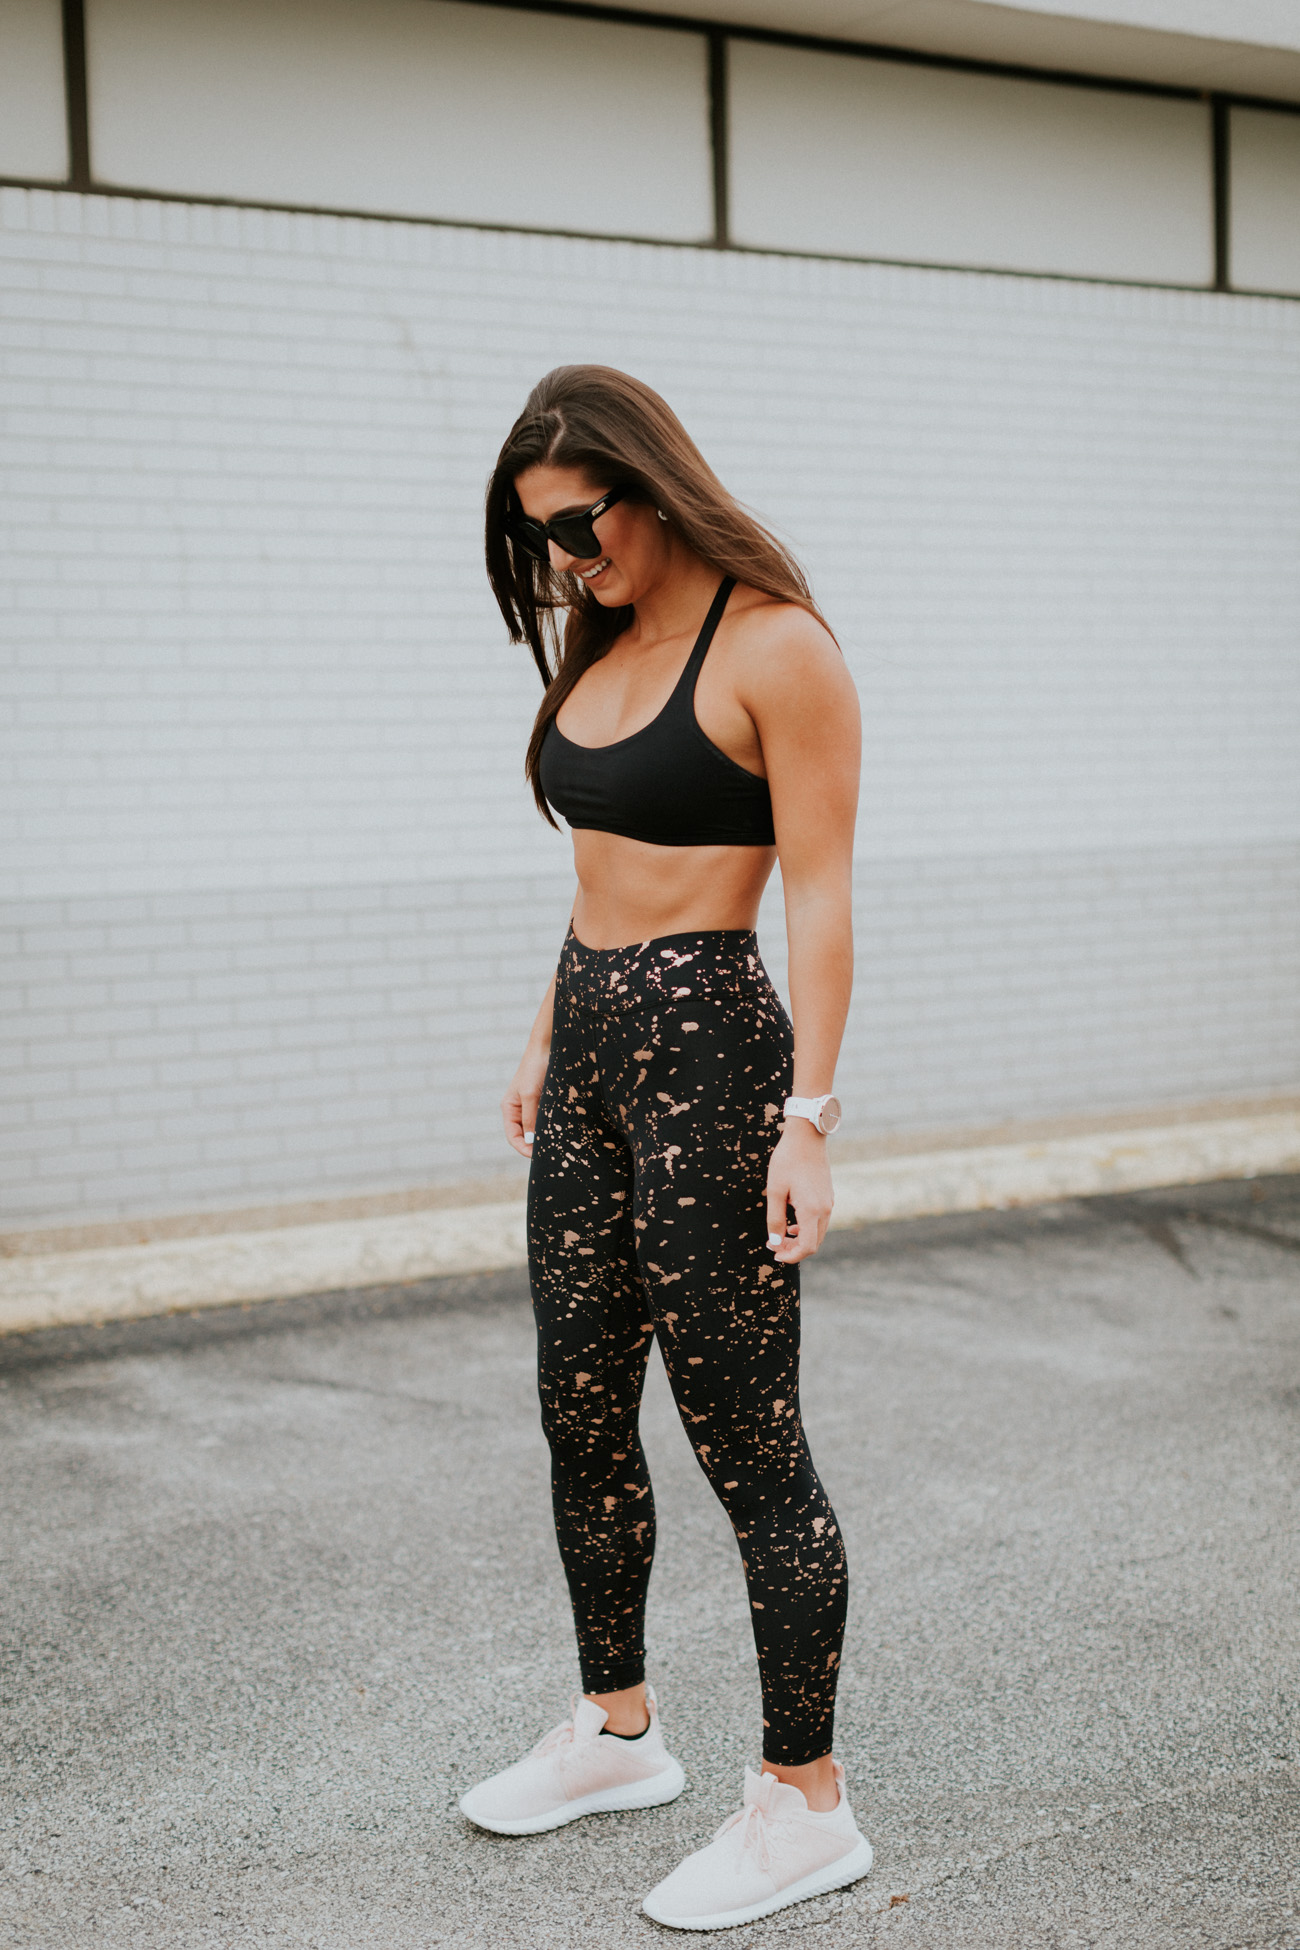 gold splatter leggings, lululemon free to be bra, adidas tubular sneakers, alo yoga jacket, alo bomber jacket, terez leggings, adidas tubular viral sneaker, athleisure, a southern drawl workouts, fall activewear, winter activewear, fit with asd videos, #fitwithasd, gym looks, trendy workout outfit, cute activewear outfit, a southern drawl workouts, weekly workout routine, weekly workouts, weekly exercises, polar a360 watch, cute activewear, cute workout outfit, running routine, girl gains, fitness inspiration, fitspo, nike athleisure outfit // grace wainwright a southern drawl